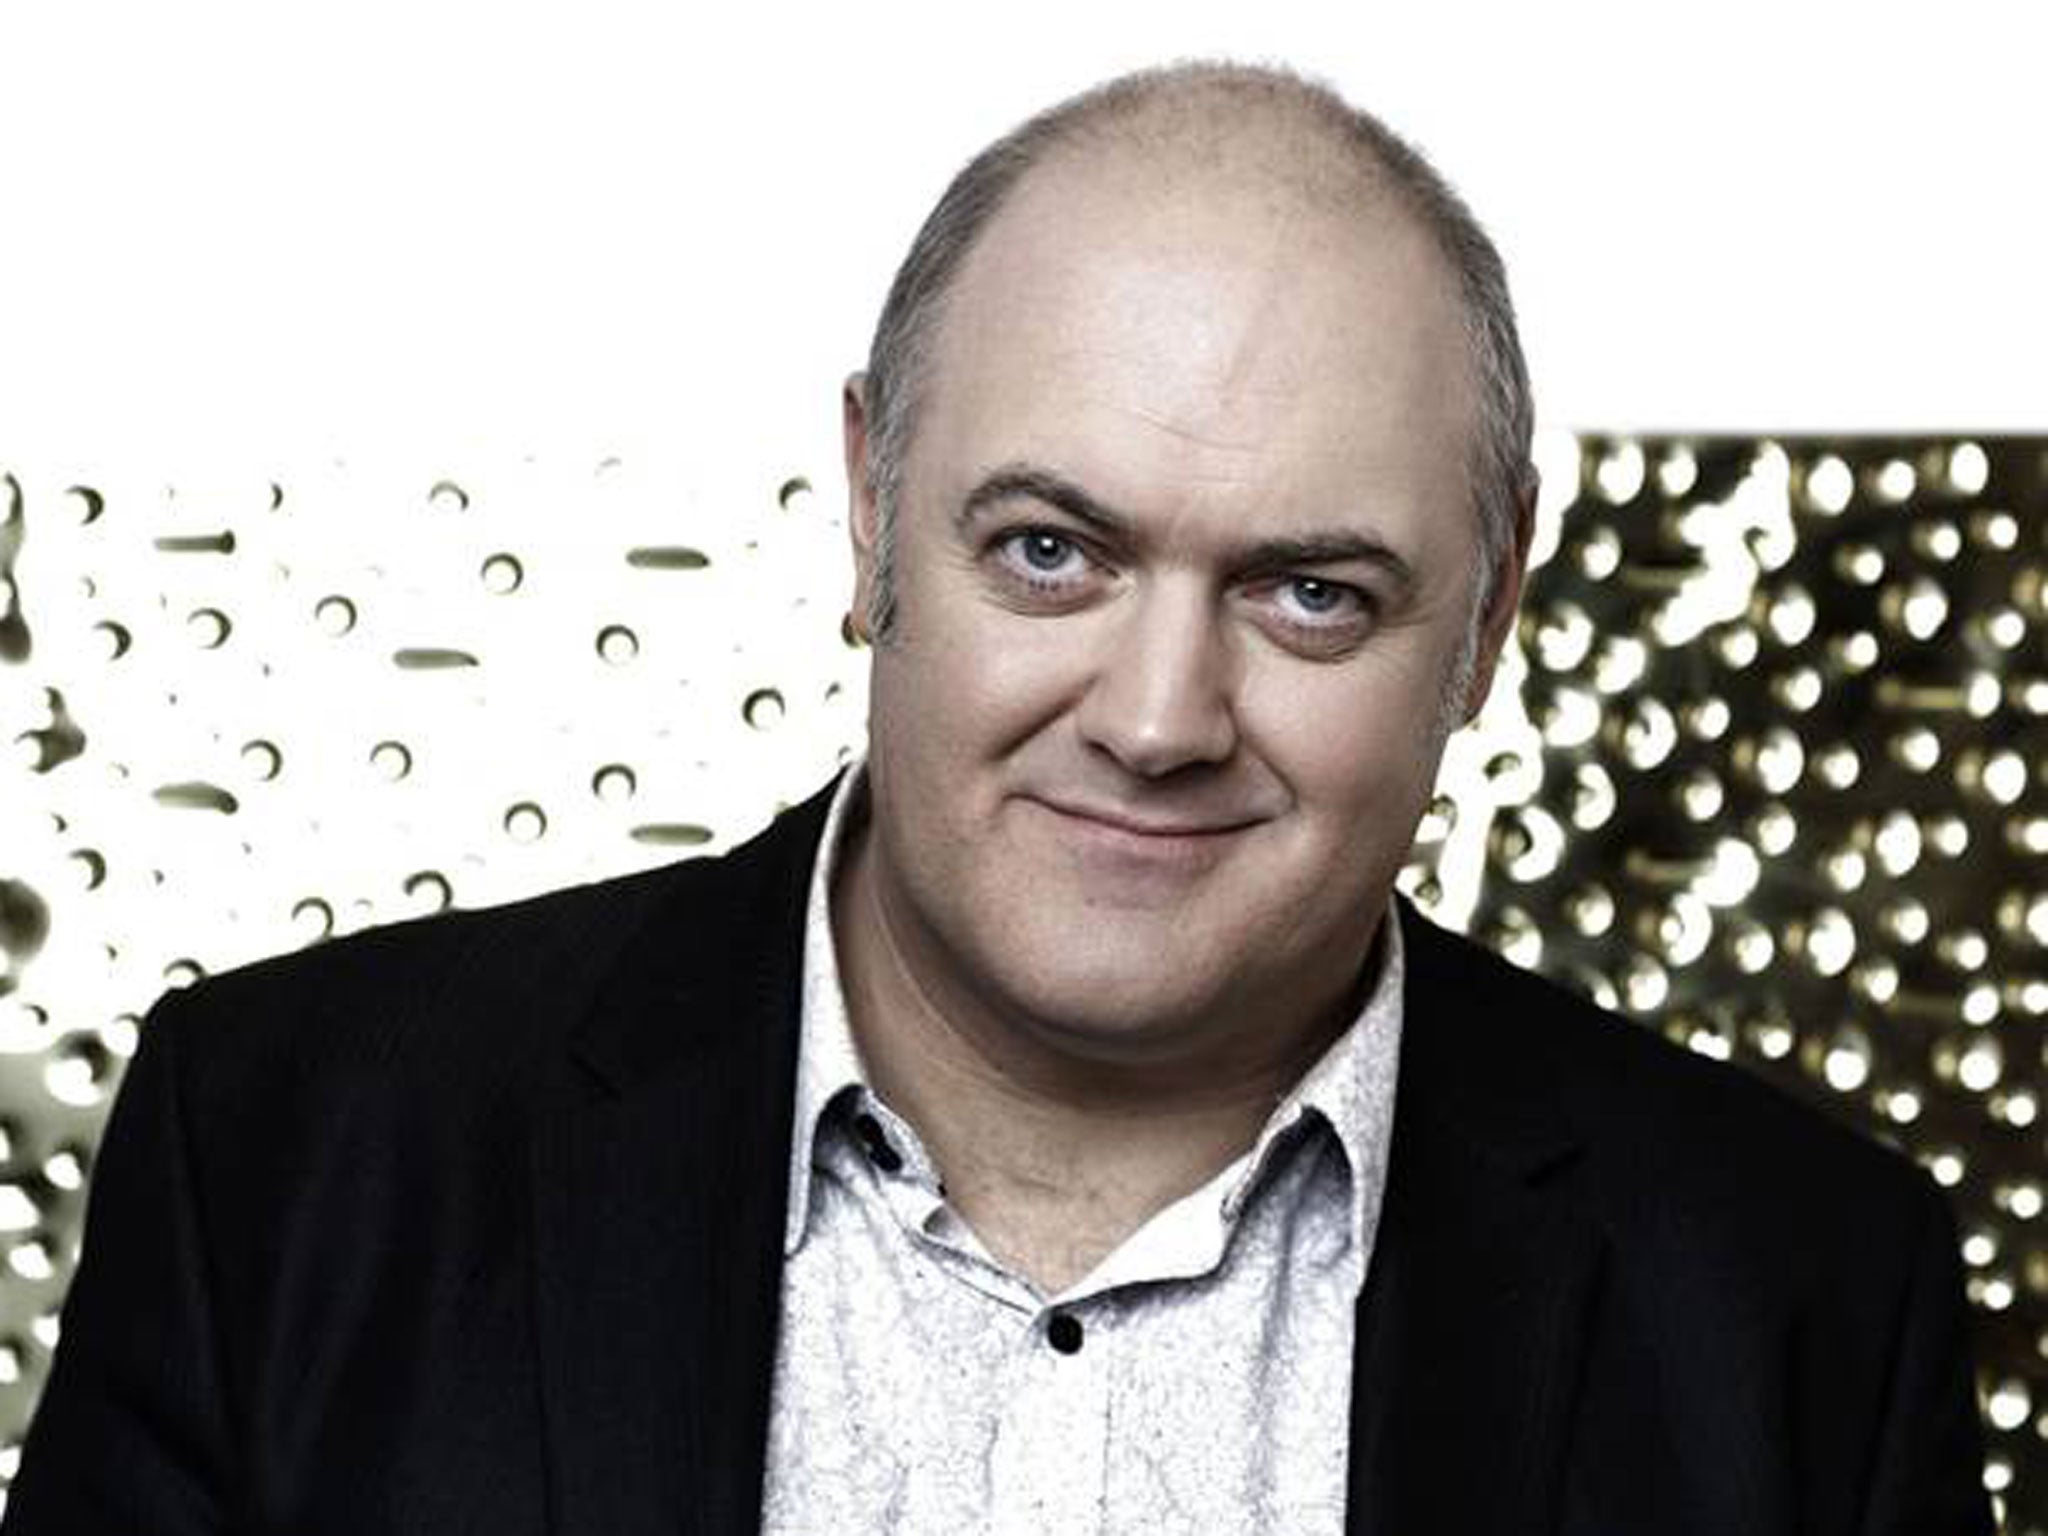 Dara O'Briain thinks the BBC's ruling on all-male comedy panels shows such as Mock the Week should have 'evolved'